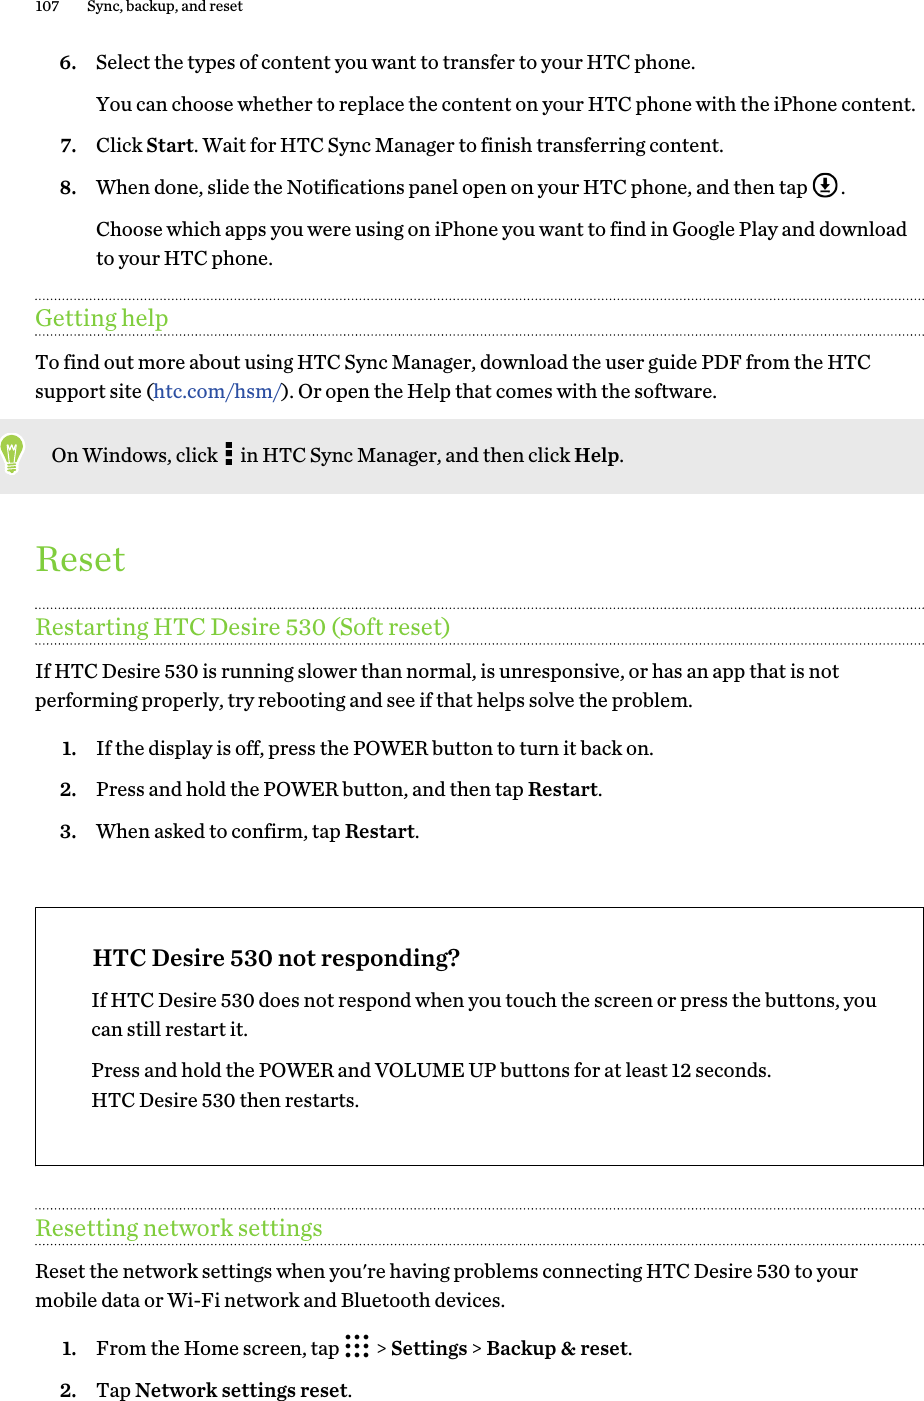 6. Select the types of content you want to transfer to your HTC phone. You can choose whether to replace the content on your HTC phone with the iPhone content.7. Click Start. Wait for HTC Sync Manager to finish transferring content.8. When done, slide the Notifications panel open on your HTC phone, and then tap  . Choose which apps you were using on iPhone you want to find in Google Play and downloadto your HTC phone.Getting helpTo find out more about using HTC Sync Manager, download the user guide PDF from the HTCsupport site (htc.com/hsm/). Or open the Help that comes with the software.On Windows, click   in HTC Sync Manager, and then click Help.ResetRestarting HTC Desire 530 (Soft reset)If HTC Desire 530 is running slower than normal, is unresponsive, or has an app that is notperforming properly, try rebooting and see if that helps solve the problem.1. If the display is off, press the POWER button to turn it back on.2. Press and hold the POWER button, and then tap Restart.3. When asked to confirm, tap Restart.HTC Desire 530 not responding?If HTC Desire 530 does not respond when you touch the screen or press the buttons, youcan still restart it.Press and hold the POWER and VOLUME UP buttons for at least 12 seconds.HTC Desire 530 then restarts.Resetting network settingsReset the network settings when you&apos;re having problems connecting HTC Desire 530 to yourmobile data or Wi-Fi network and Bluetooth devices.1. From the Home screen, tap   &gt; Settings &gt; Backup &amp; reset.2. Tap Network settings reset.107 Sync, backup, and reset